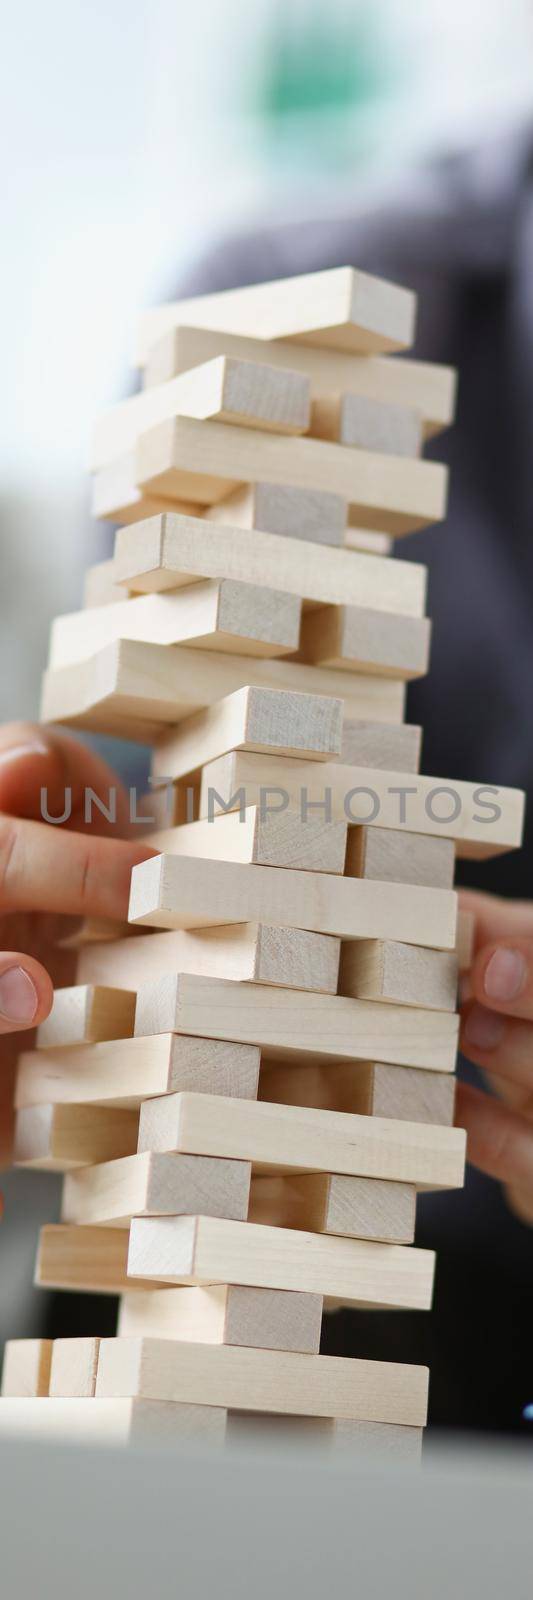 Young man removing wooden blocks from toy tower closeup. Board games concept